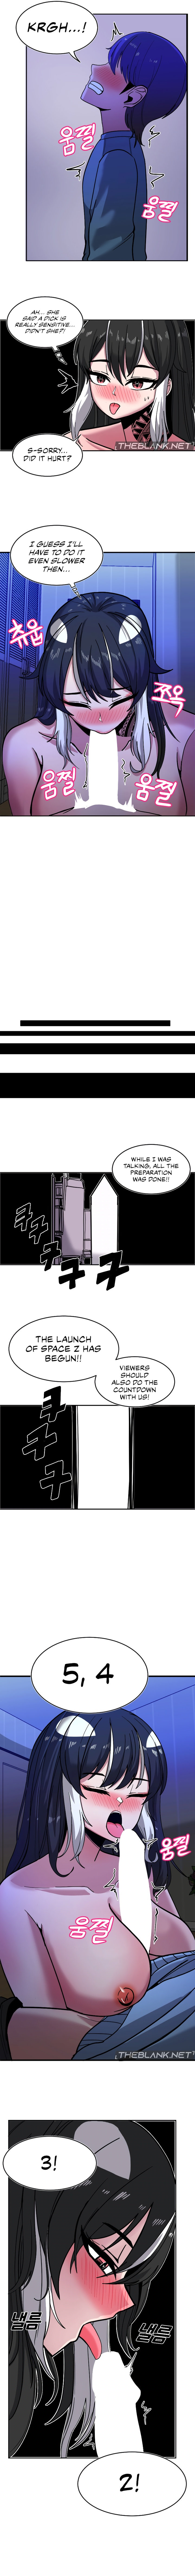 Double Life of Gukbap - Chapter 4 Page 5